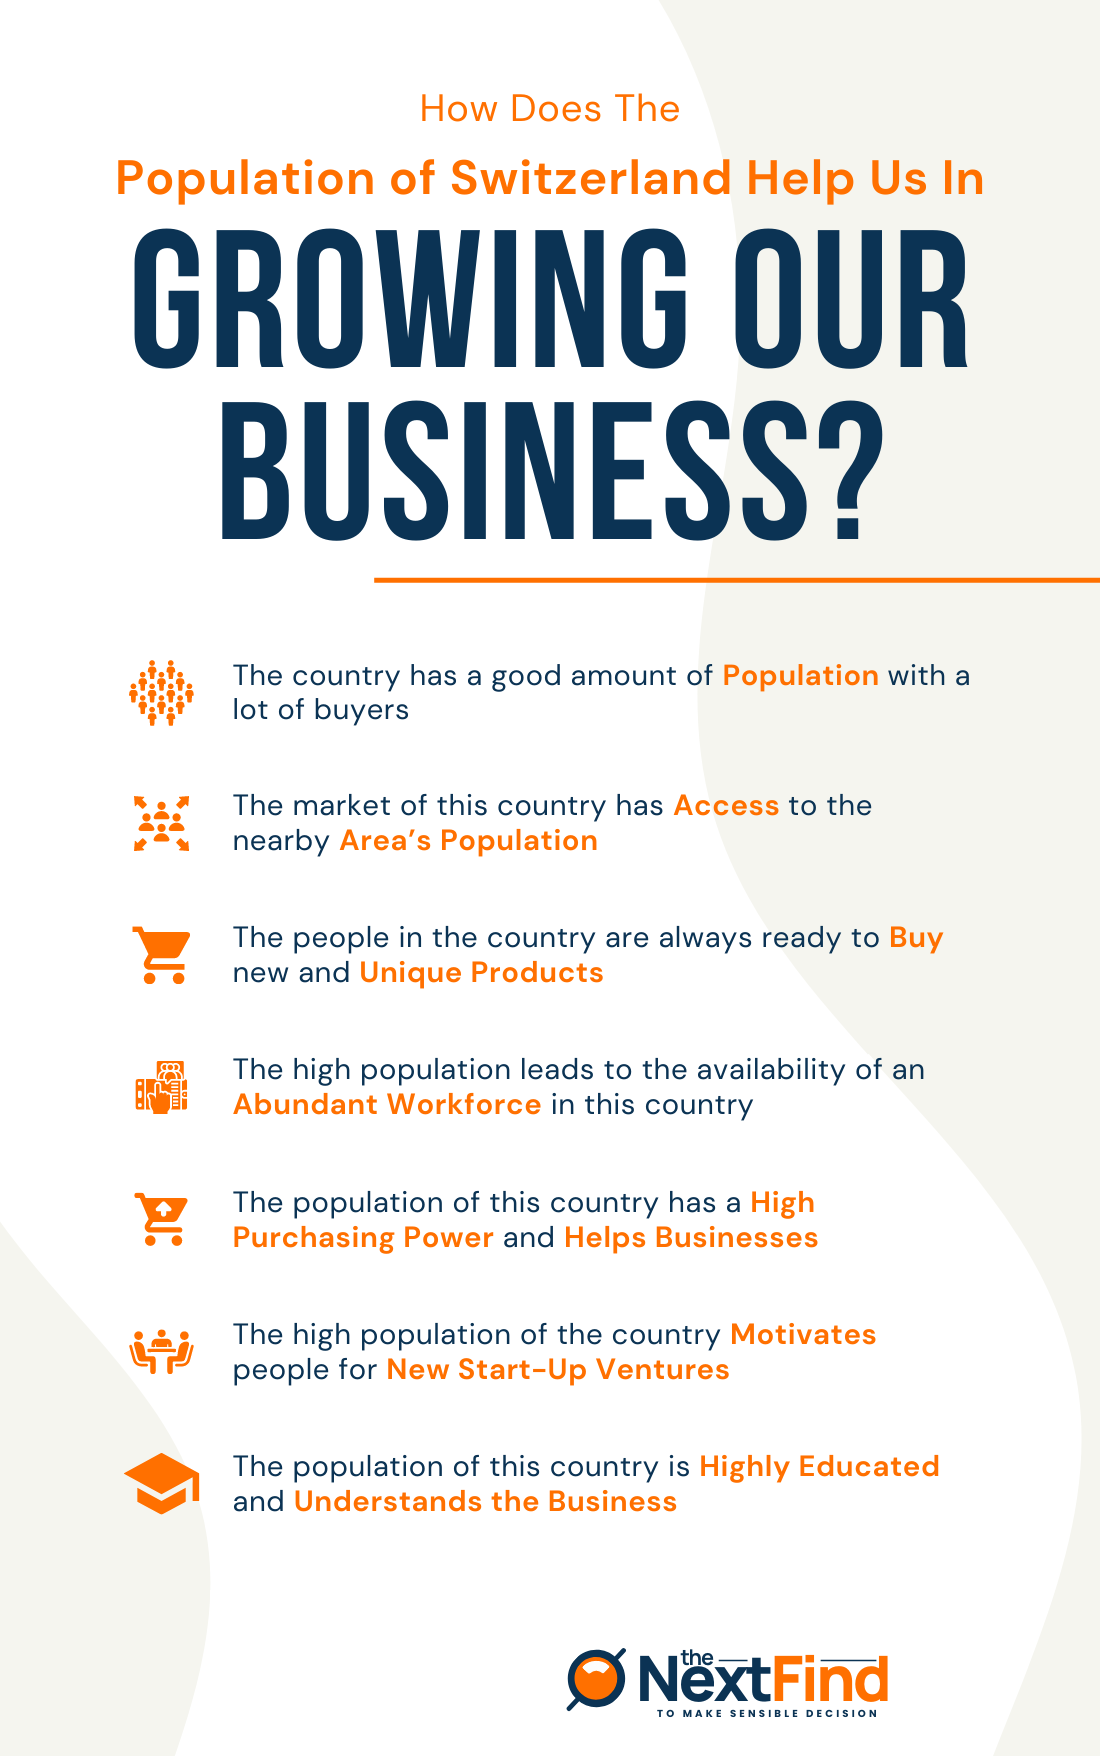 how does the population of Switzerland help us growing our business 